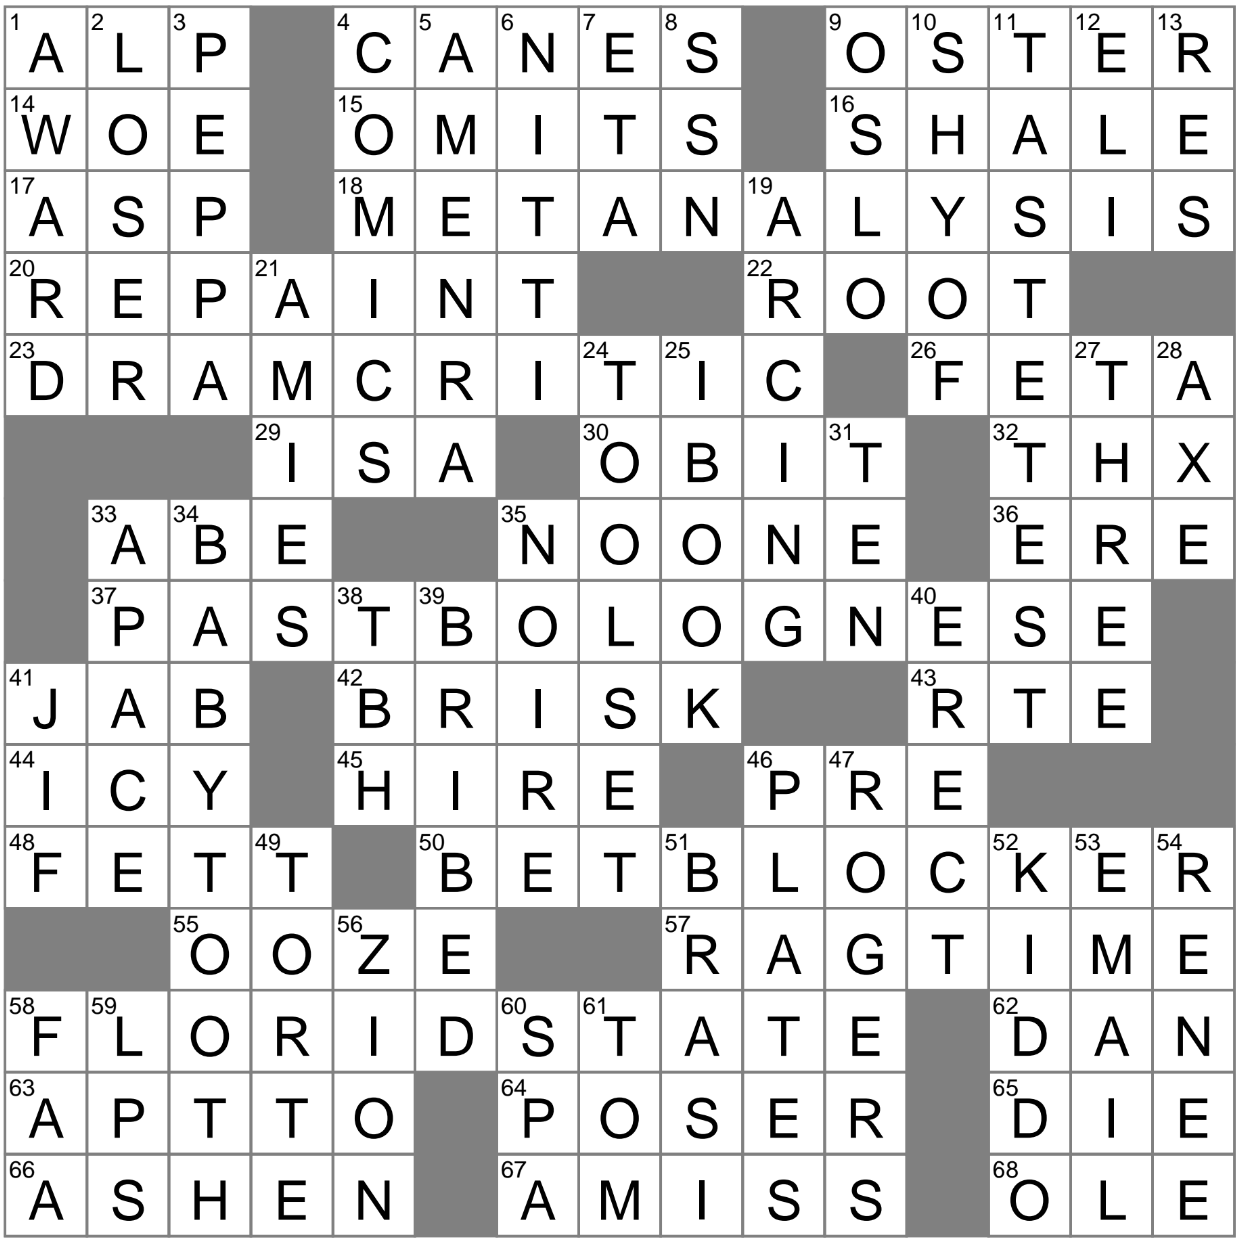 LA Times Crossword 6 Jan 23 Friday Knowledge and brain activity with